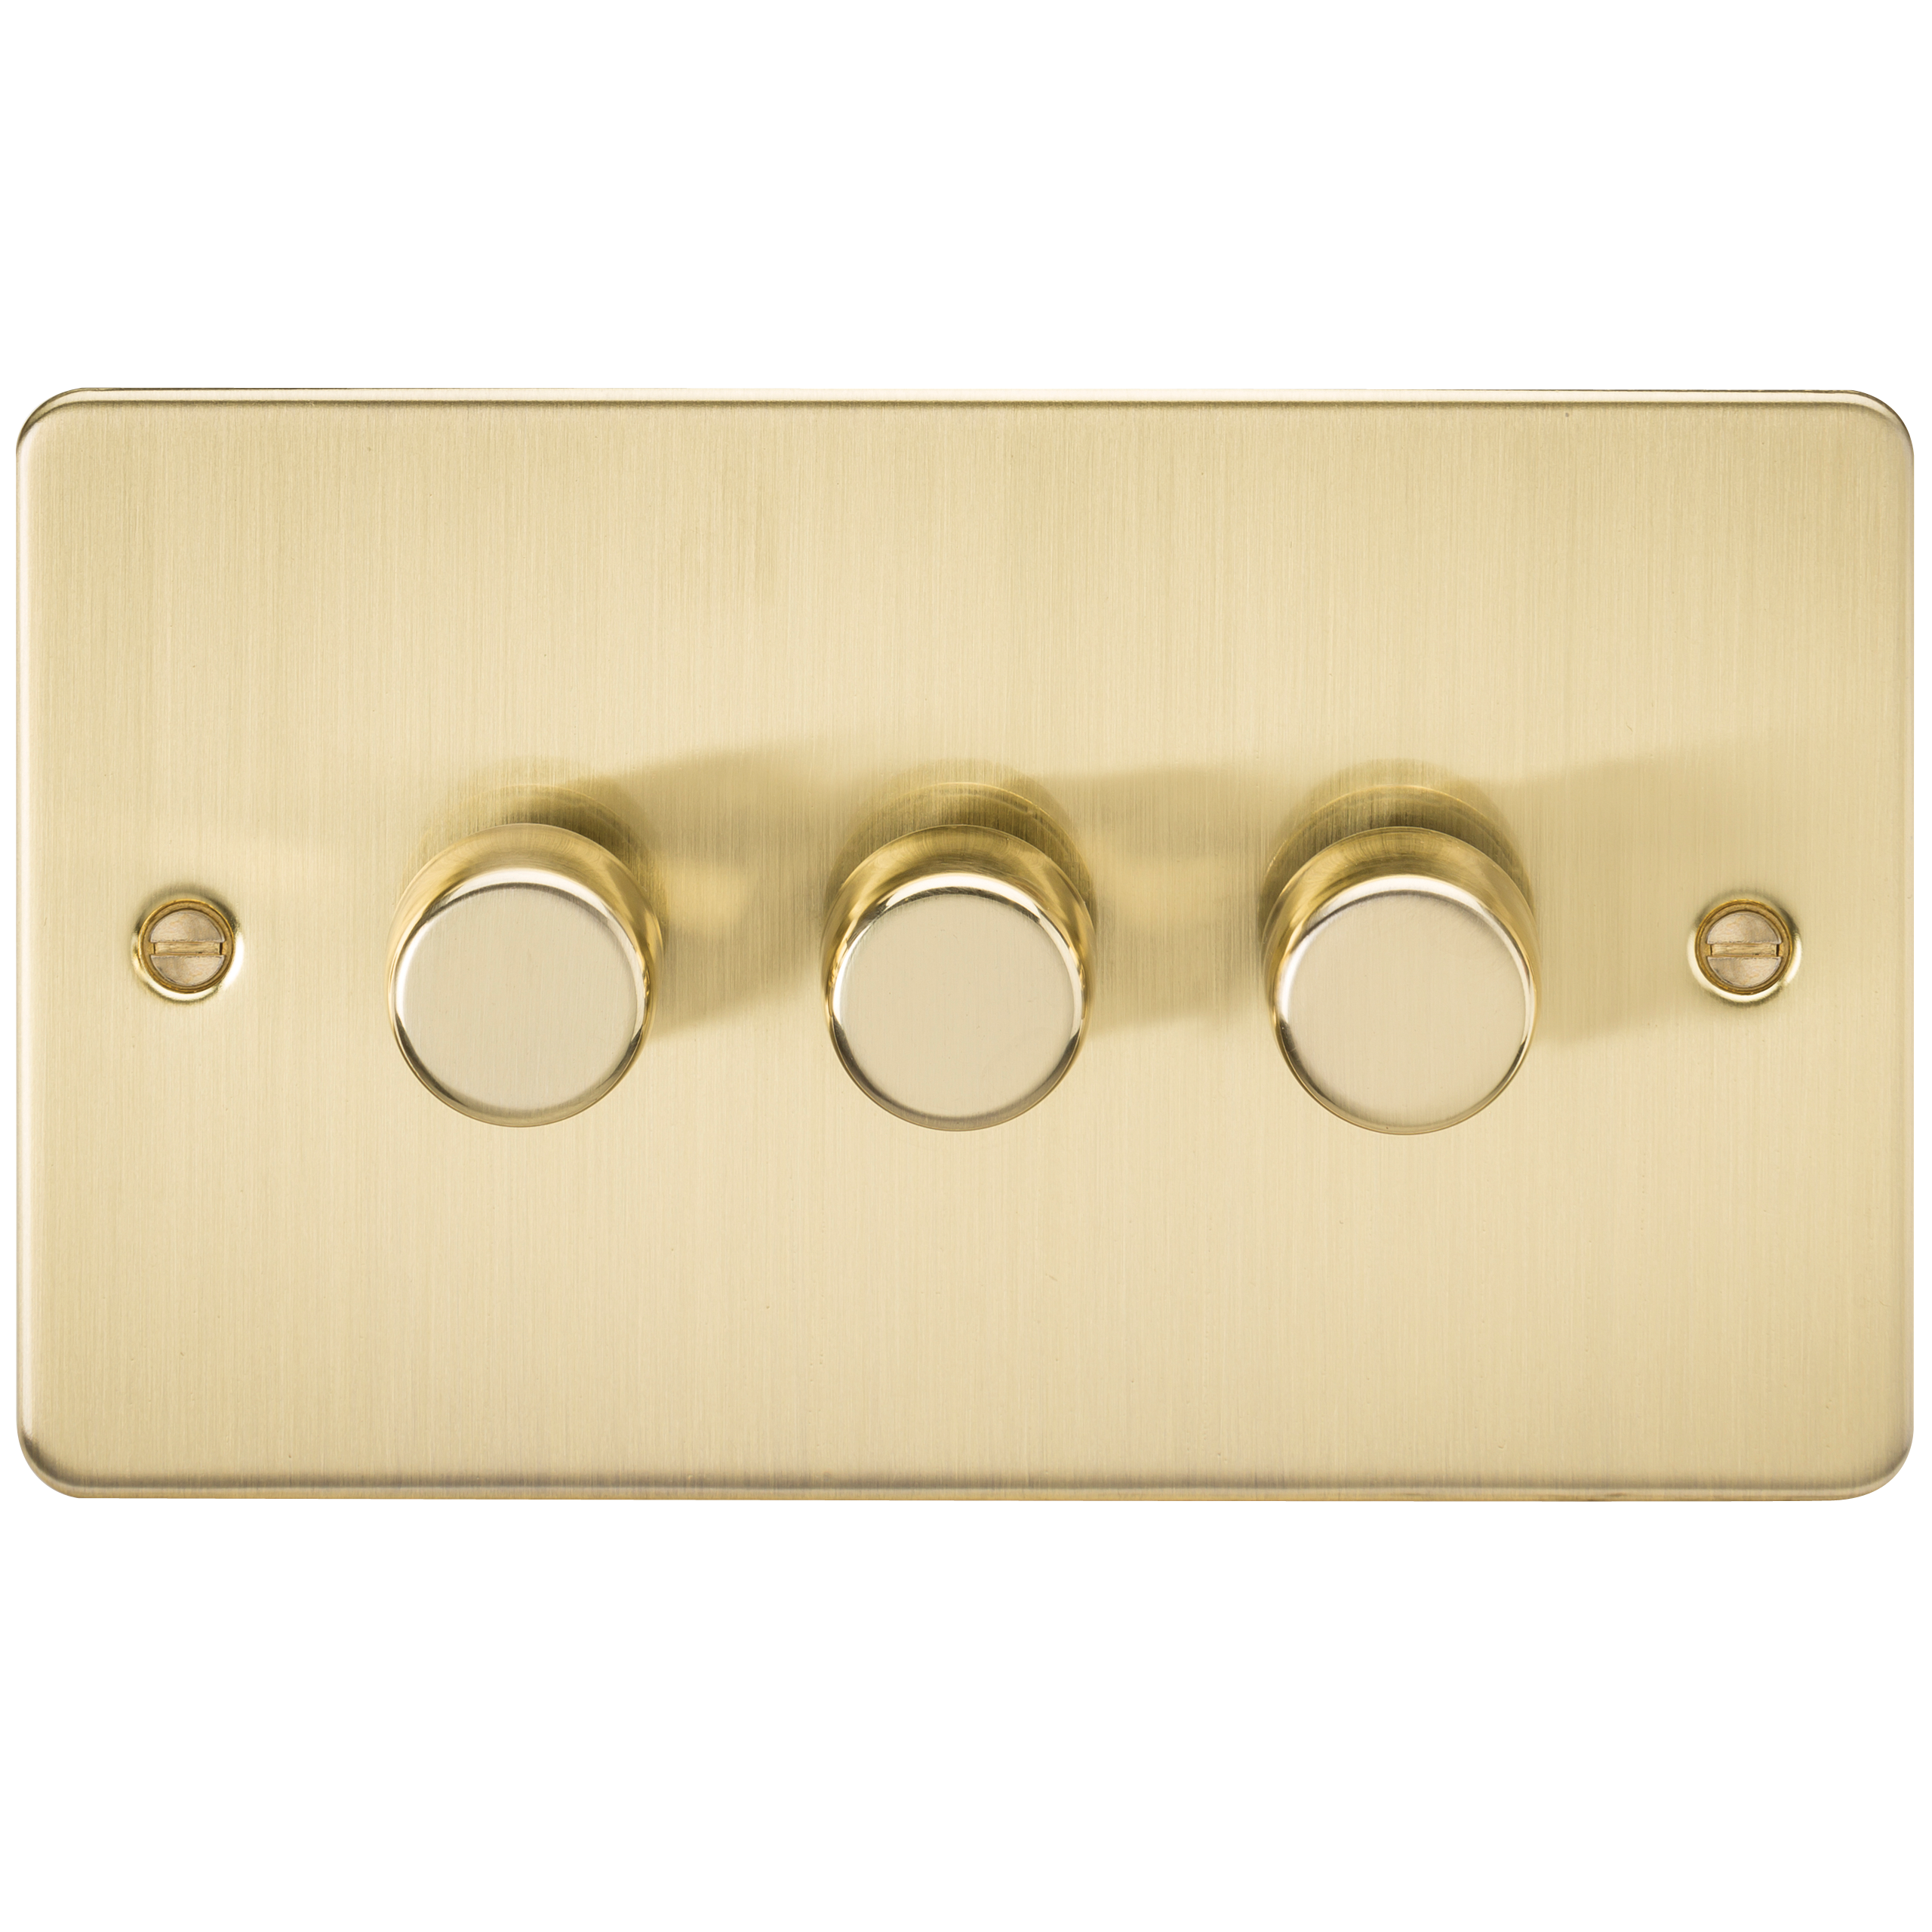 FLAT PLATE 3G 2 WAY 40-400W DIMMER - BRUSHED BRASS - FP2173BB 